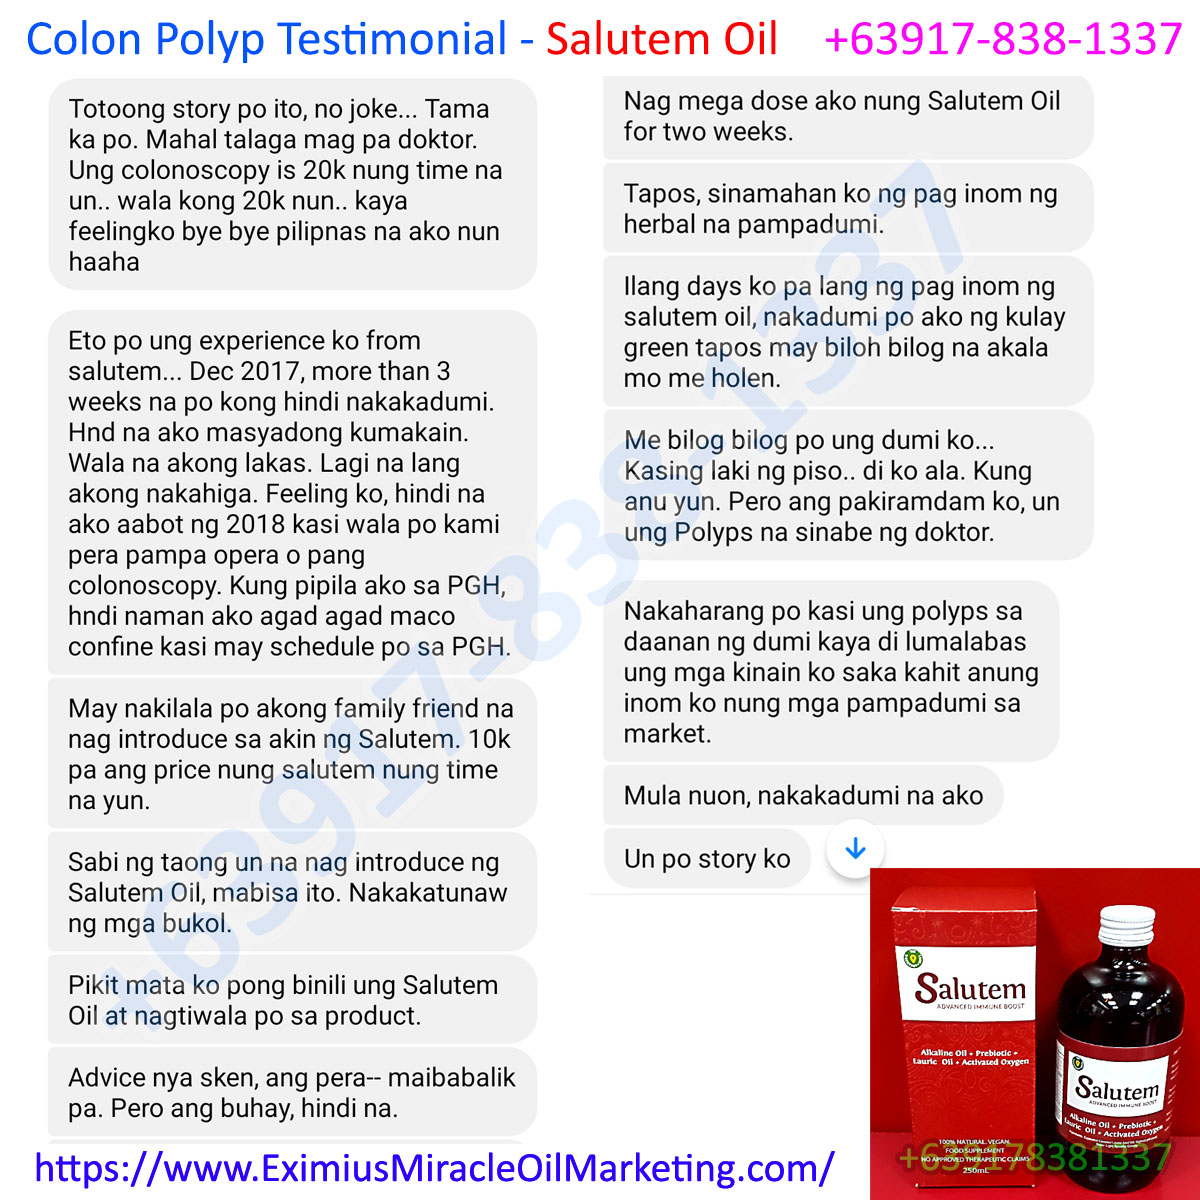 how to treat colon polyp